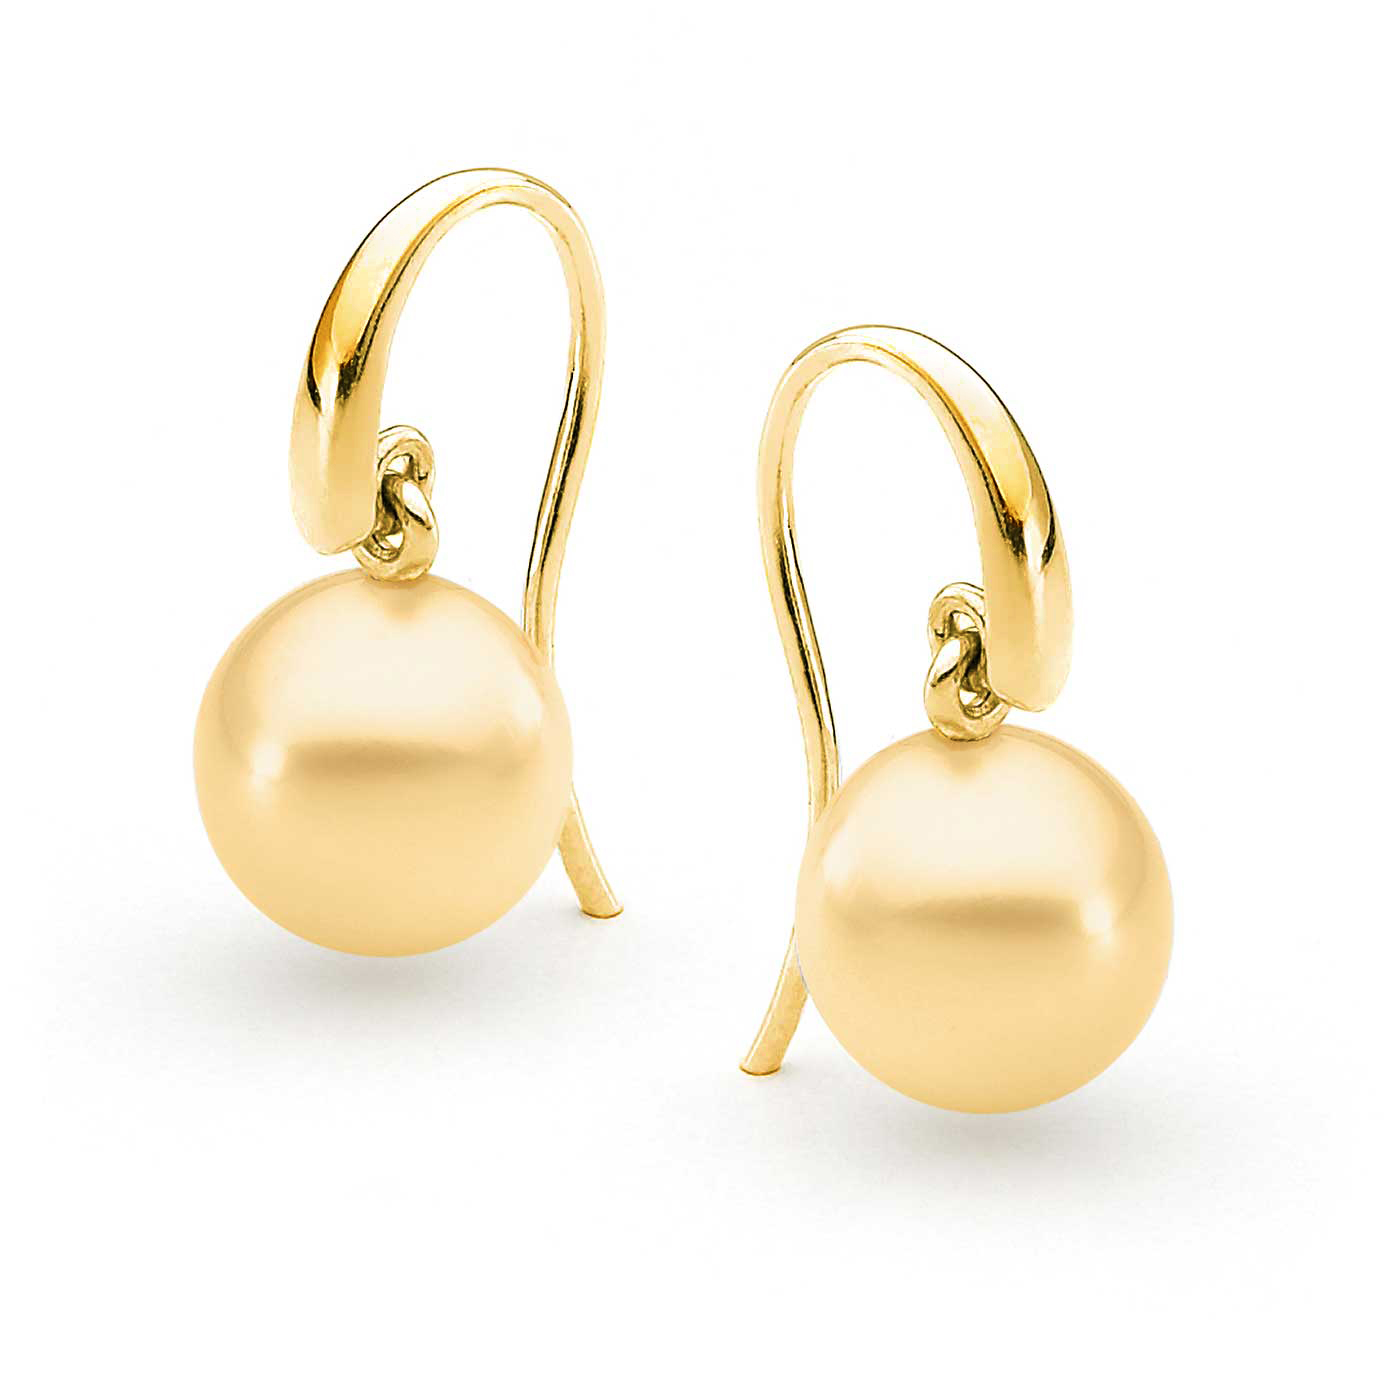 Articulated French Hook Pearl Earrings - Allure South Sea Pearls